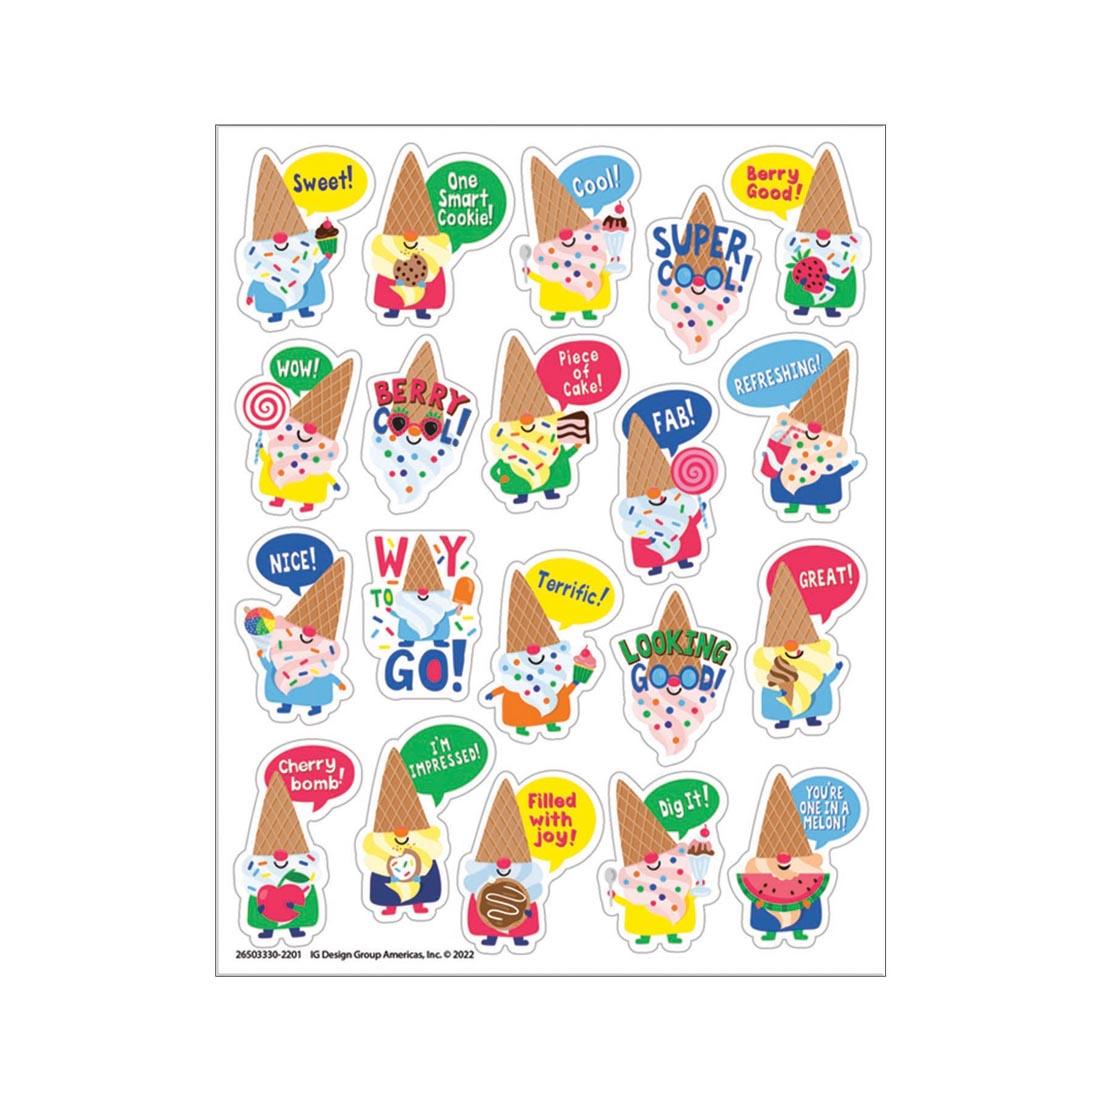 sample sheet of Dessert Gnomes Candy Scented Stickers By Eureka, featuring gnomes with ice cream cone hats and various desserts